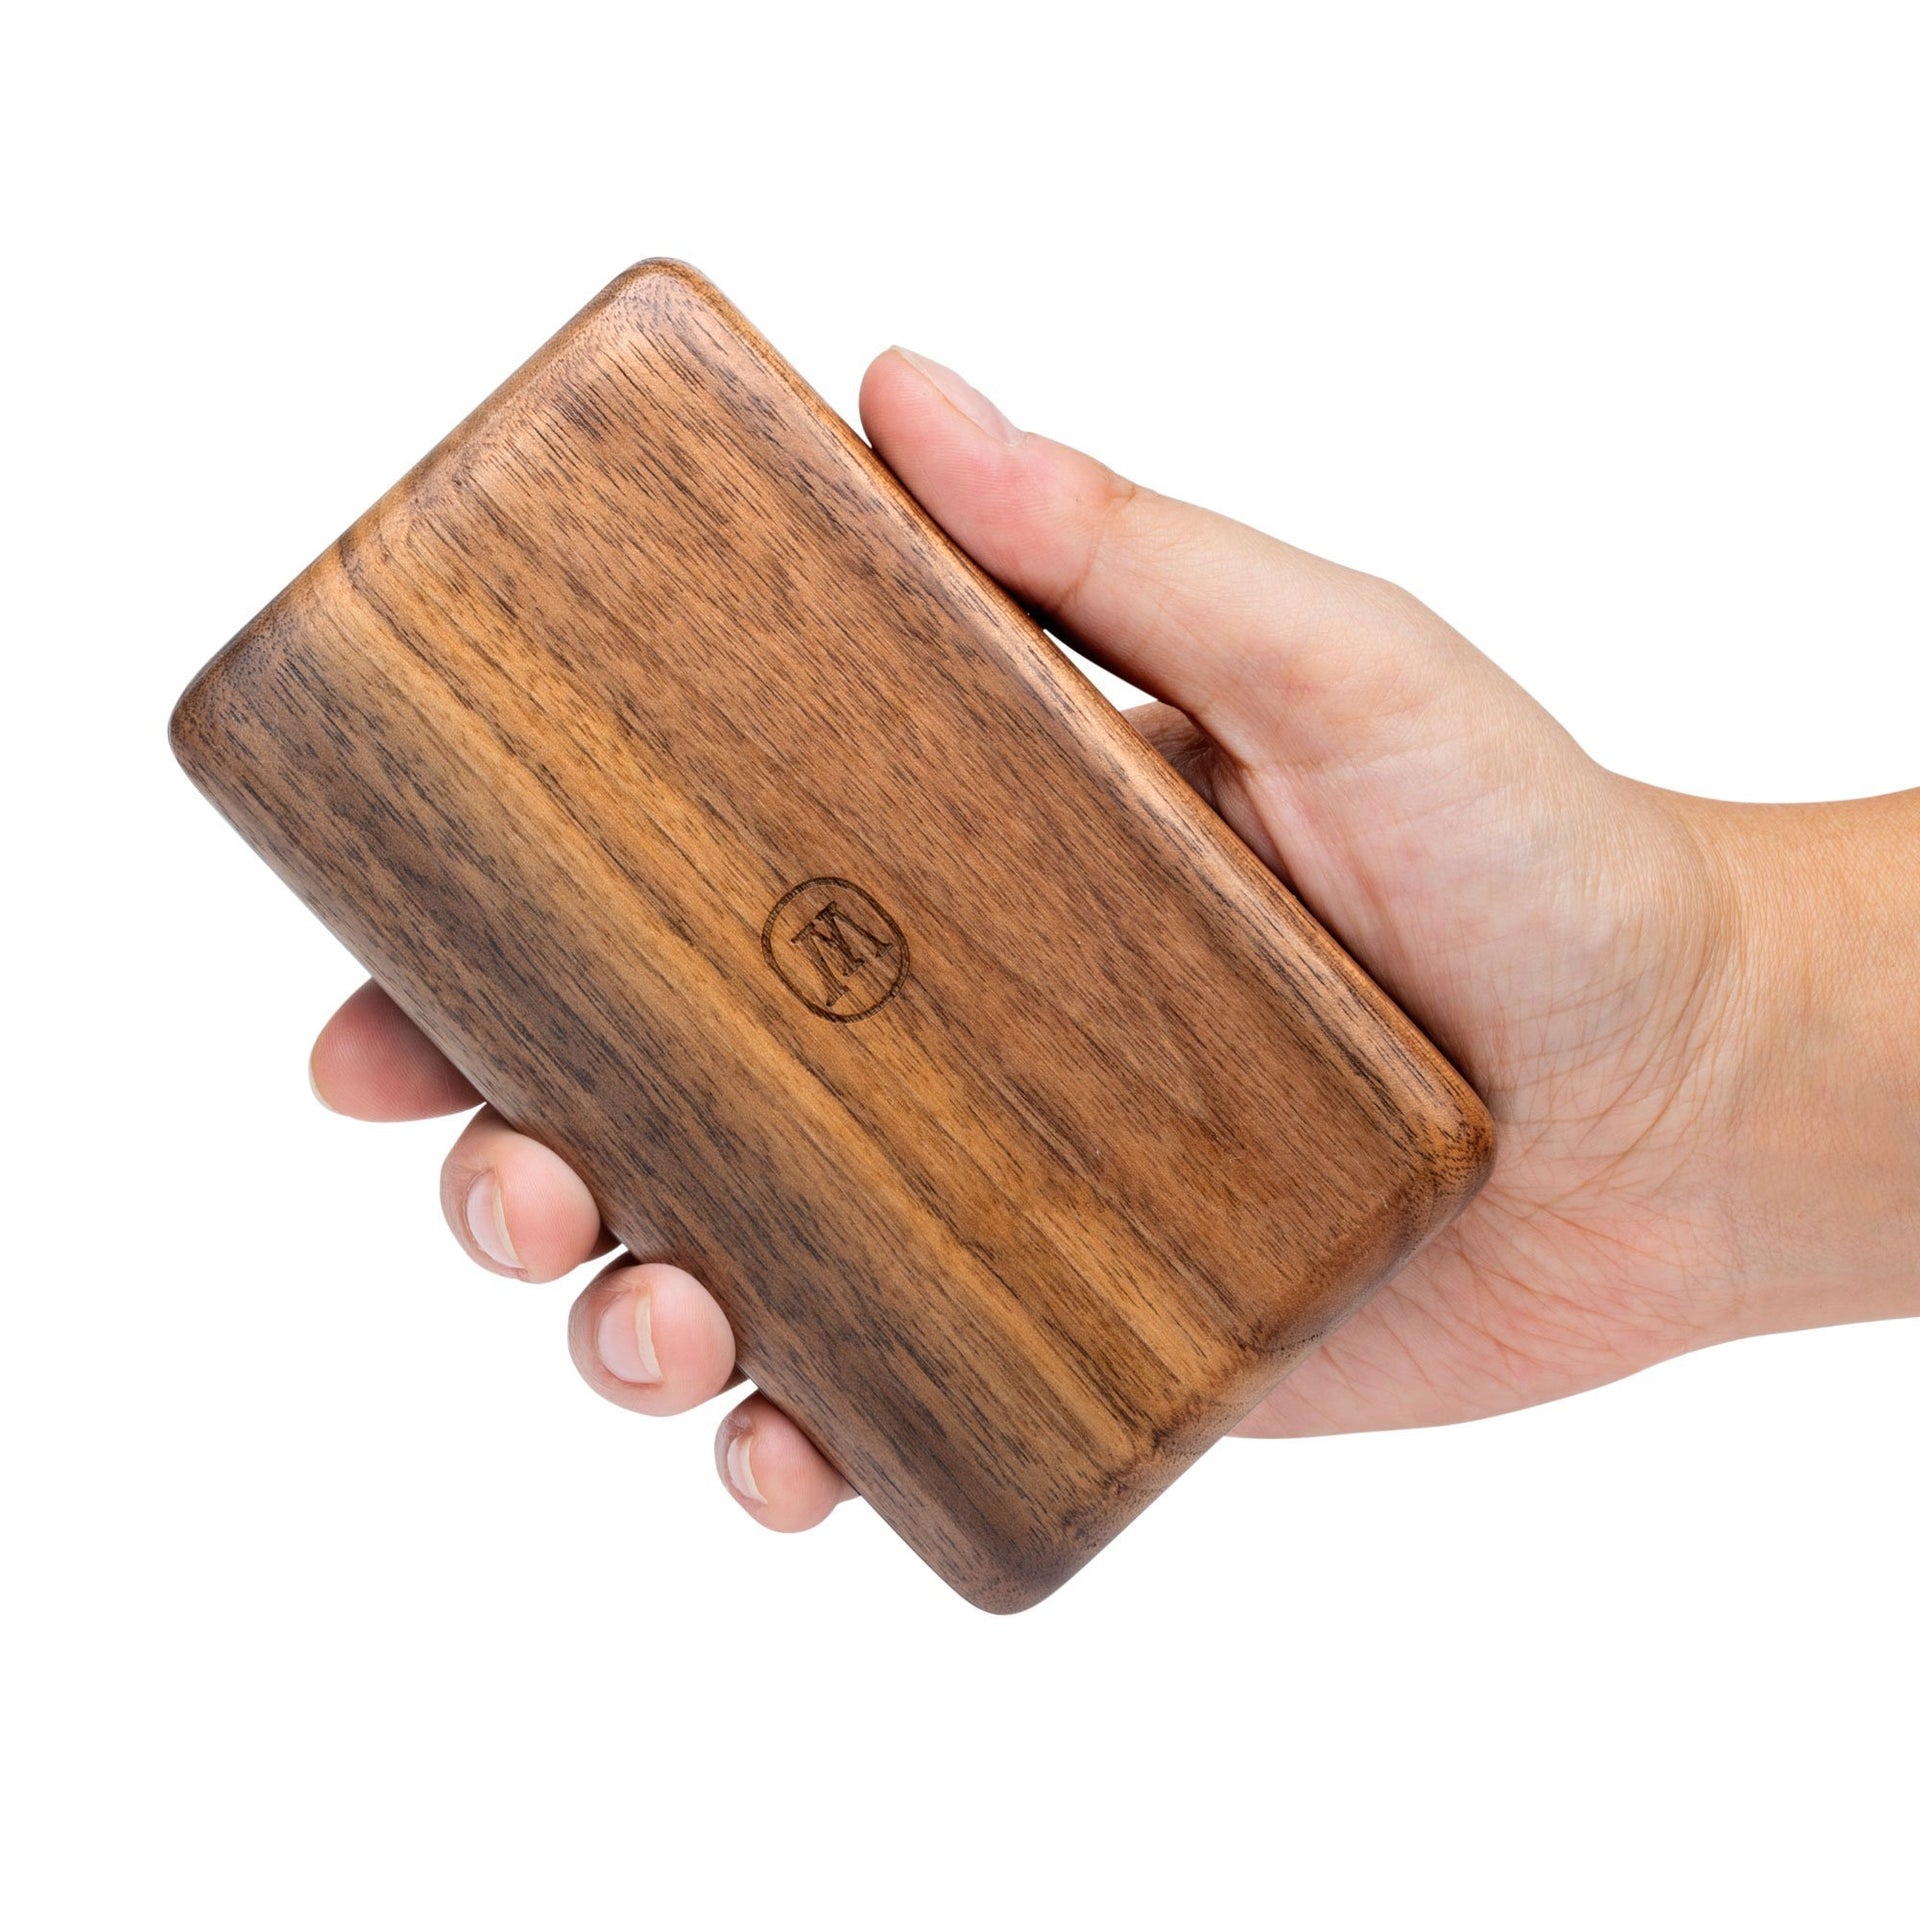 Marley Natural American Black Walnut Rolling Tray - Large / $ 79.99 at 420  Science